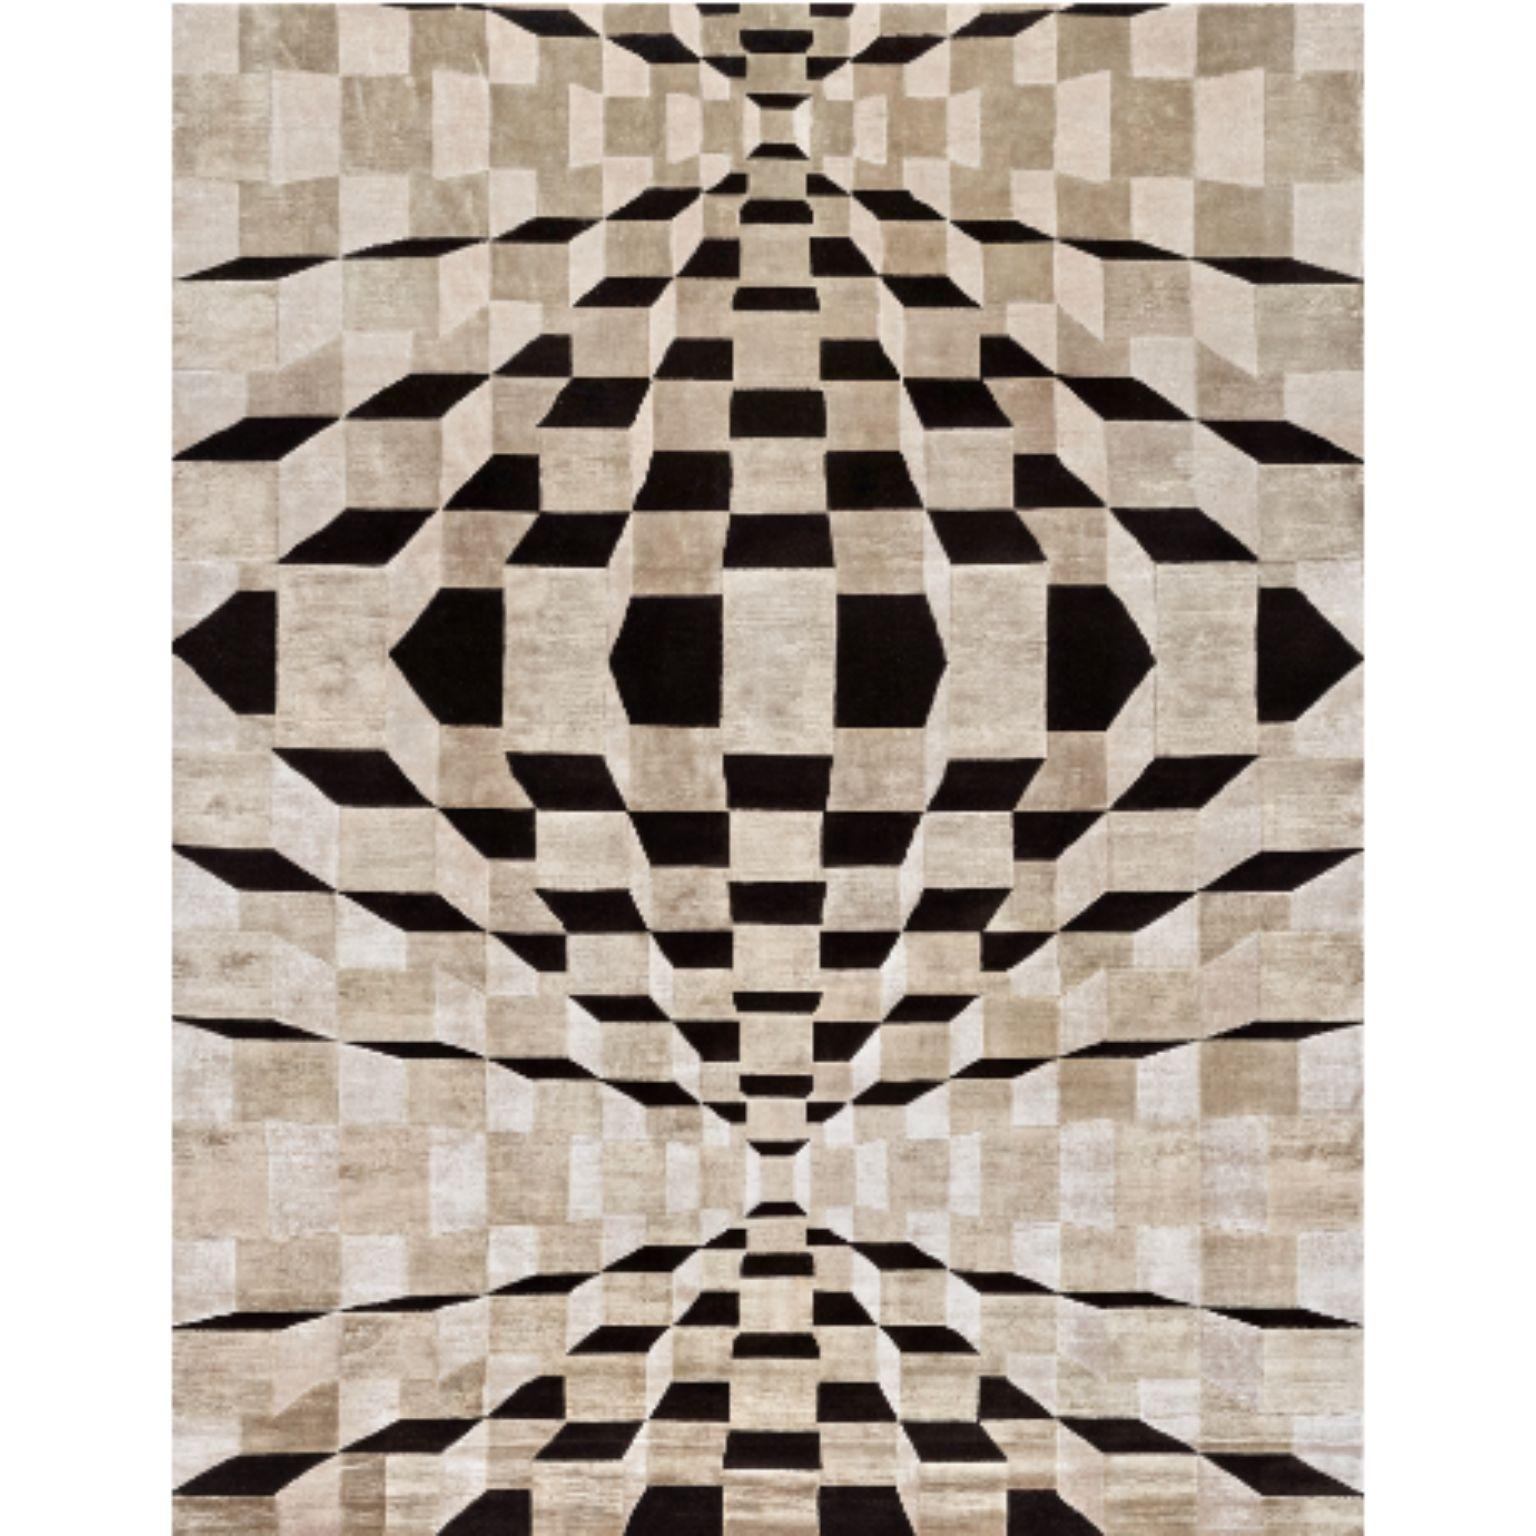 MATRIX 200 rug by Illulian
Dimensions: D300 x H200 cm 
Materials: Wool 50% , Silk 50%
Variations available and prices may vary according to materials and sizes. 

Illulian, historic and prestigious rug company brand, internationally renowned in